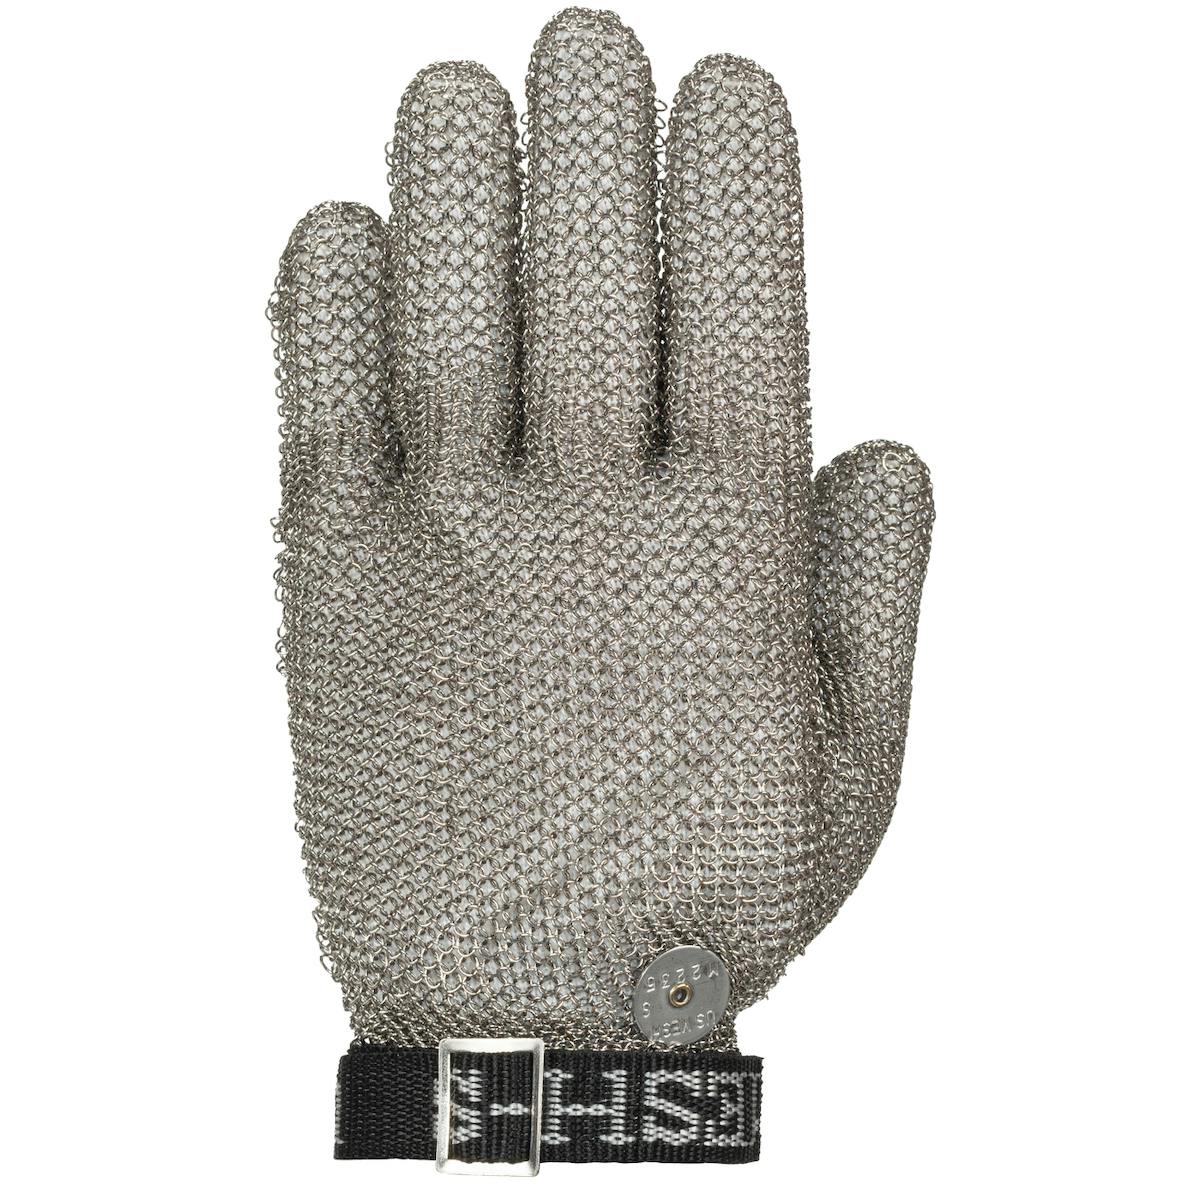 US Mesh® Stainless Steel Mesh Glove with Adjustable Strap - Wrist Length (USM-1105)